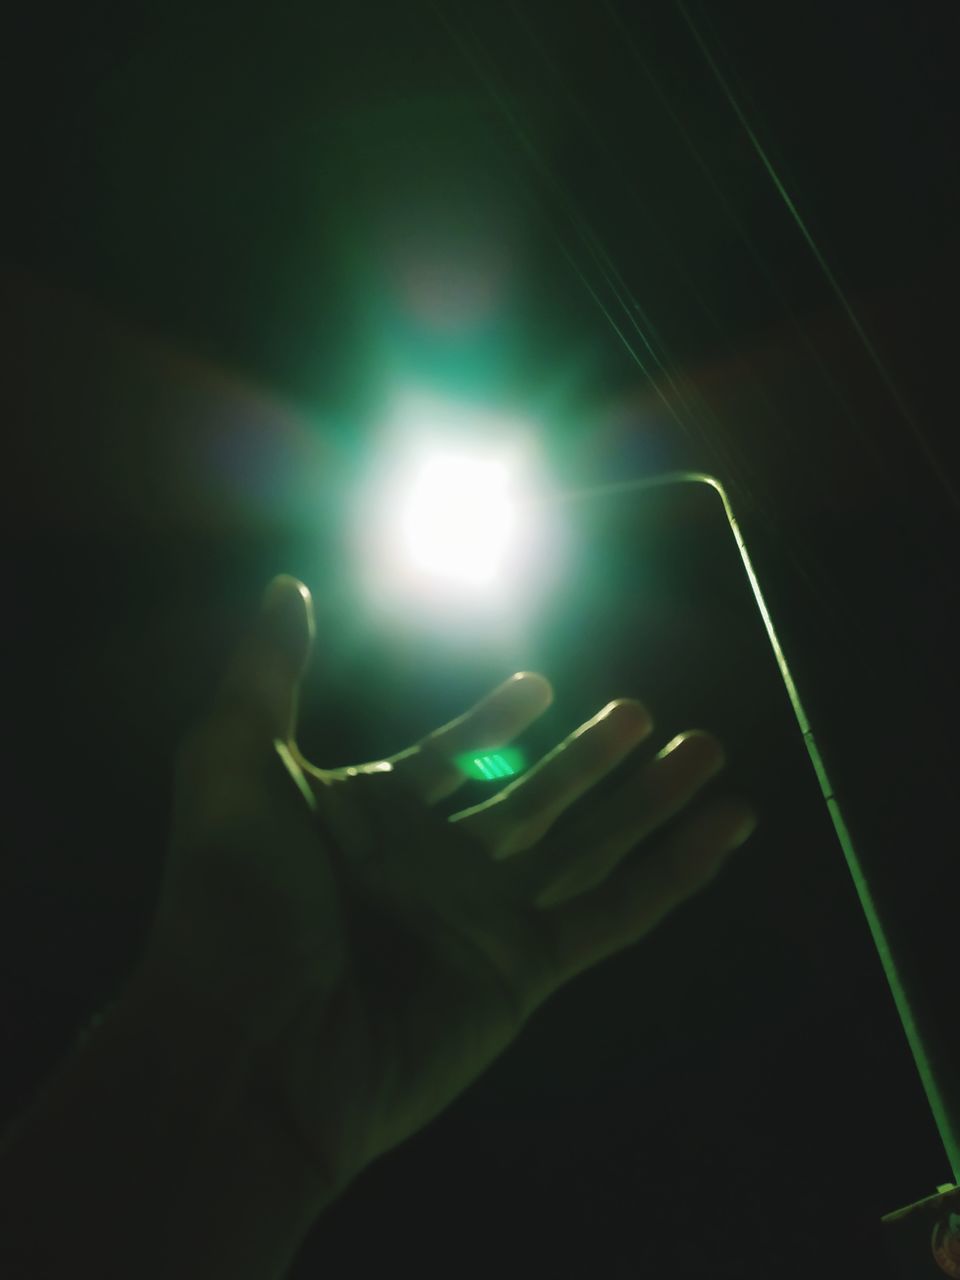 hand, light, green, darkness, one person, holding, illuminated, lighting, light - natural phenomenon, finger, indoors, lighting equipment, technology, glowing, night, adult, lens flare, close-up